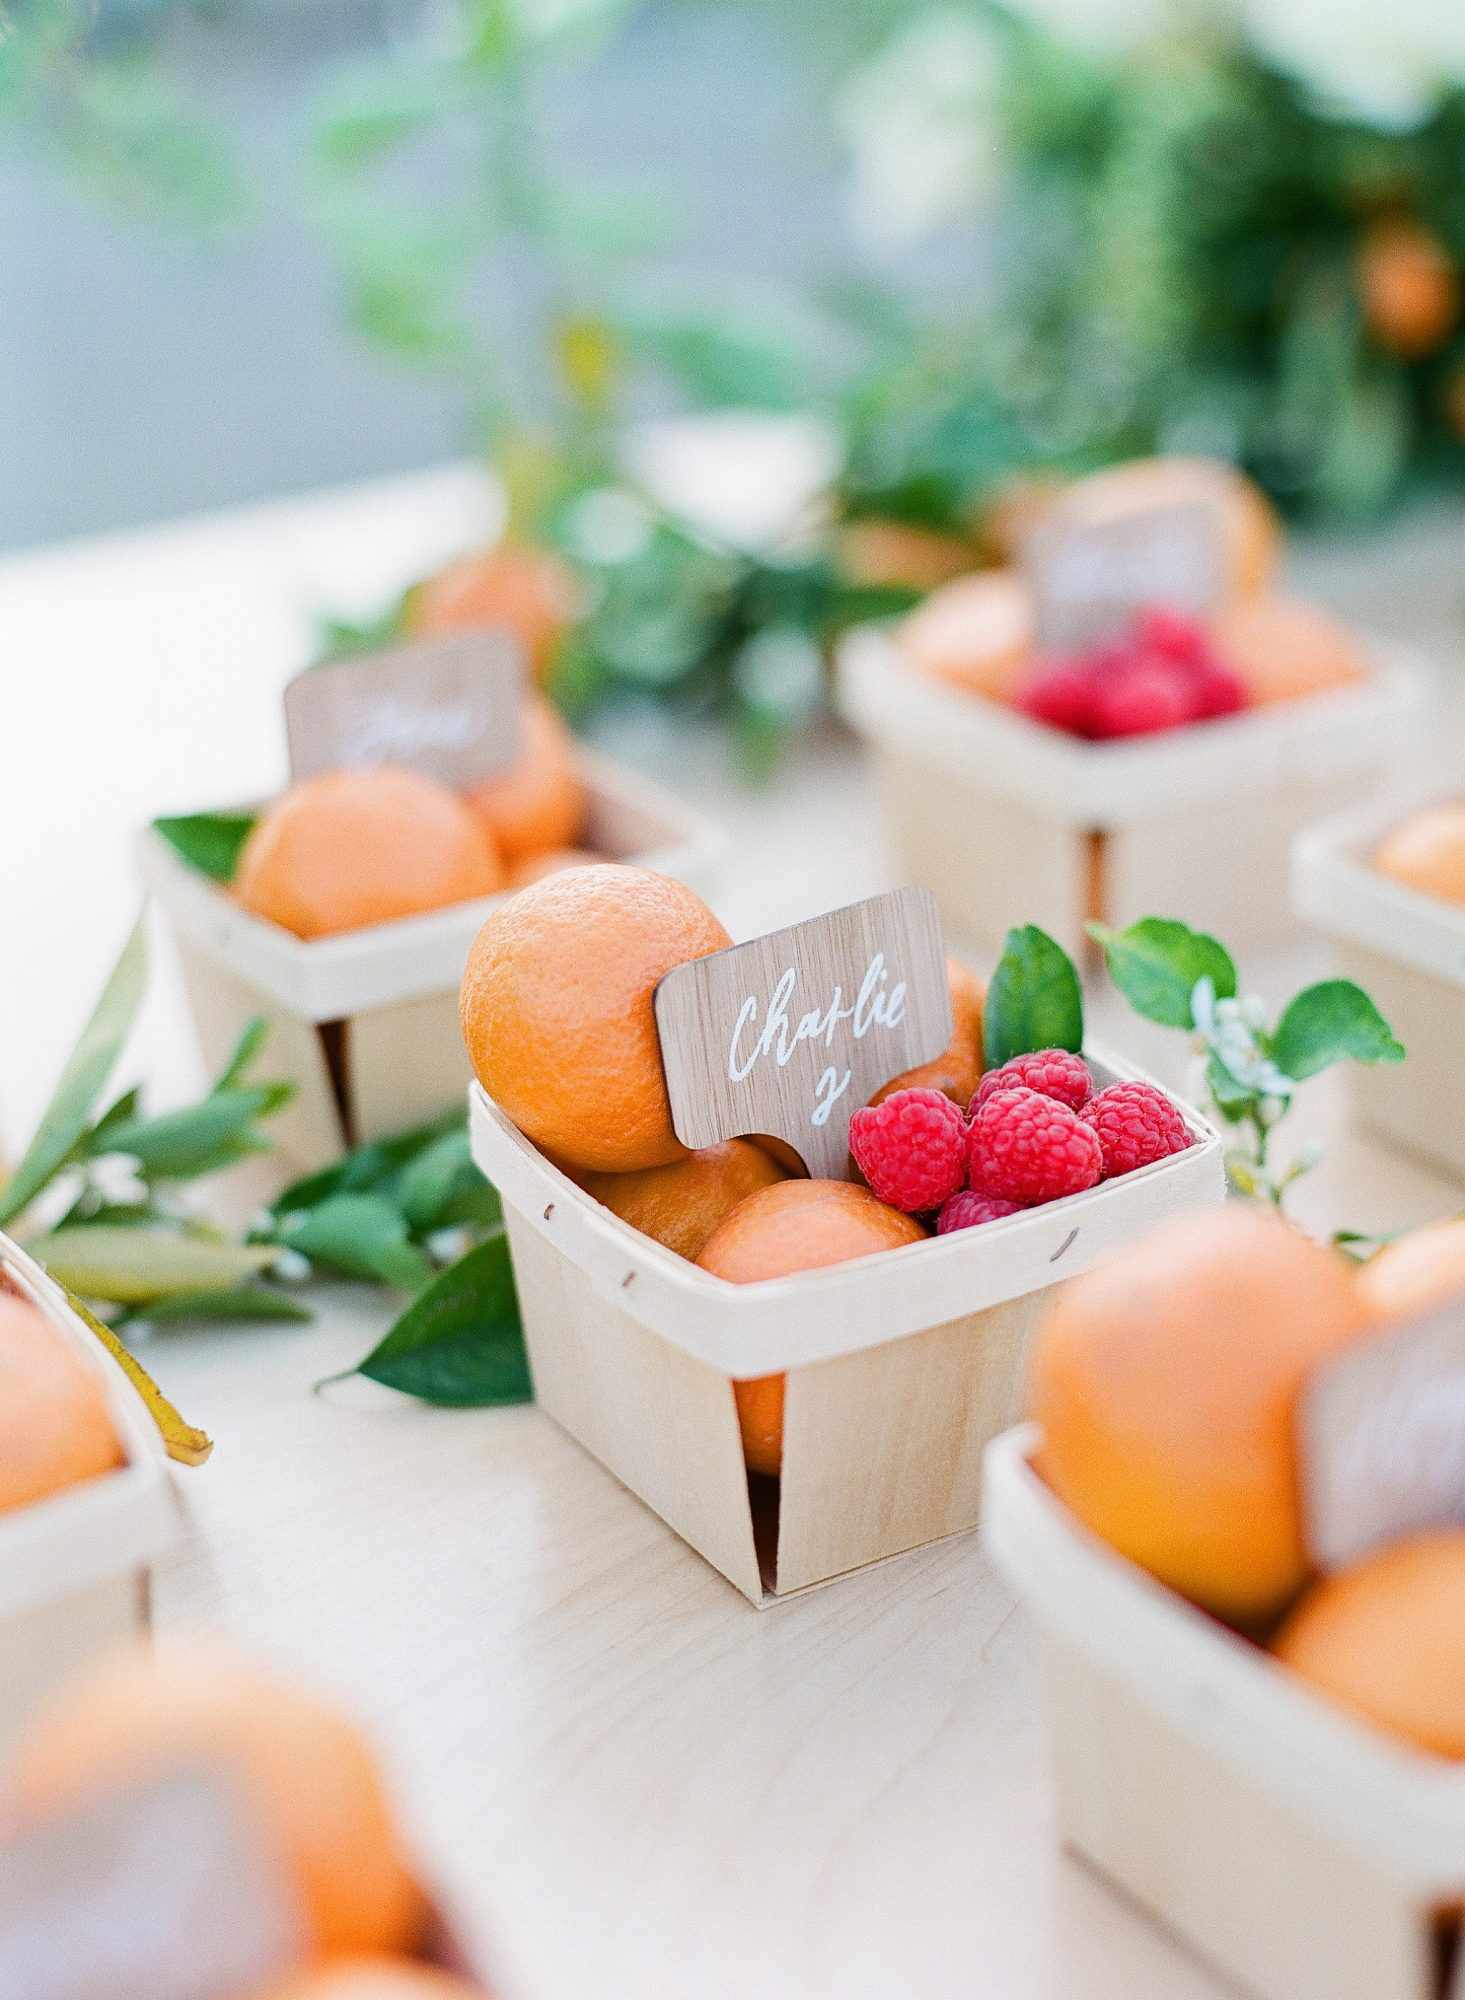 plan rehearsal dinner - fruit guests name